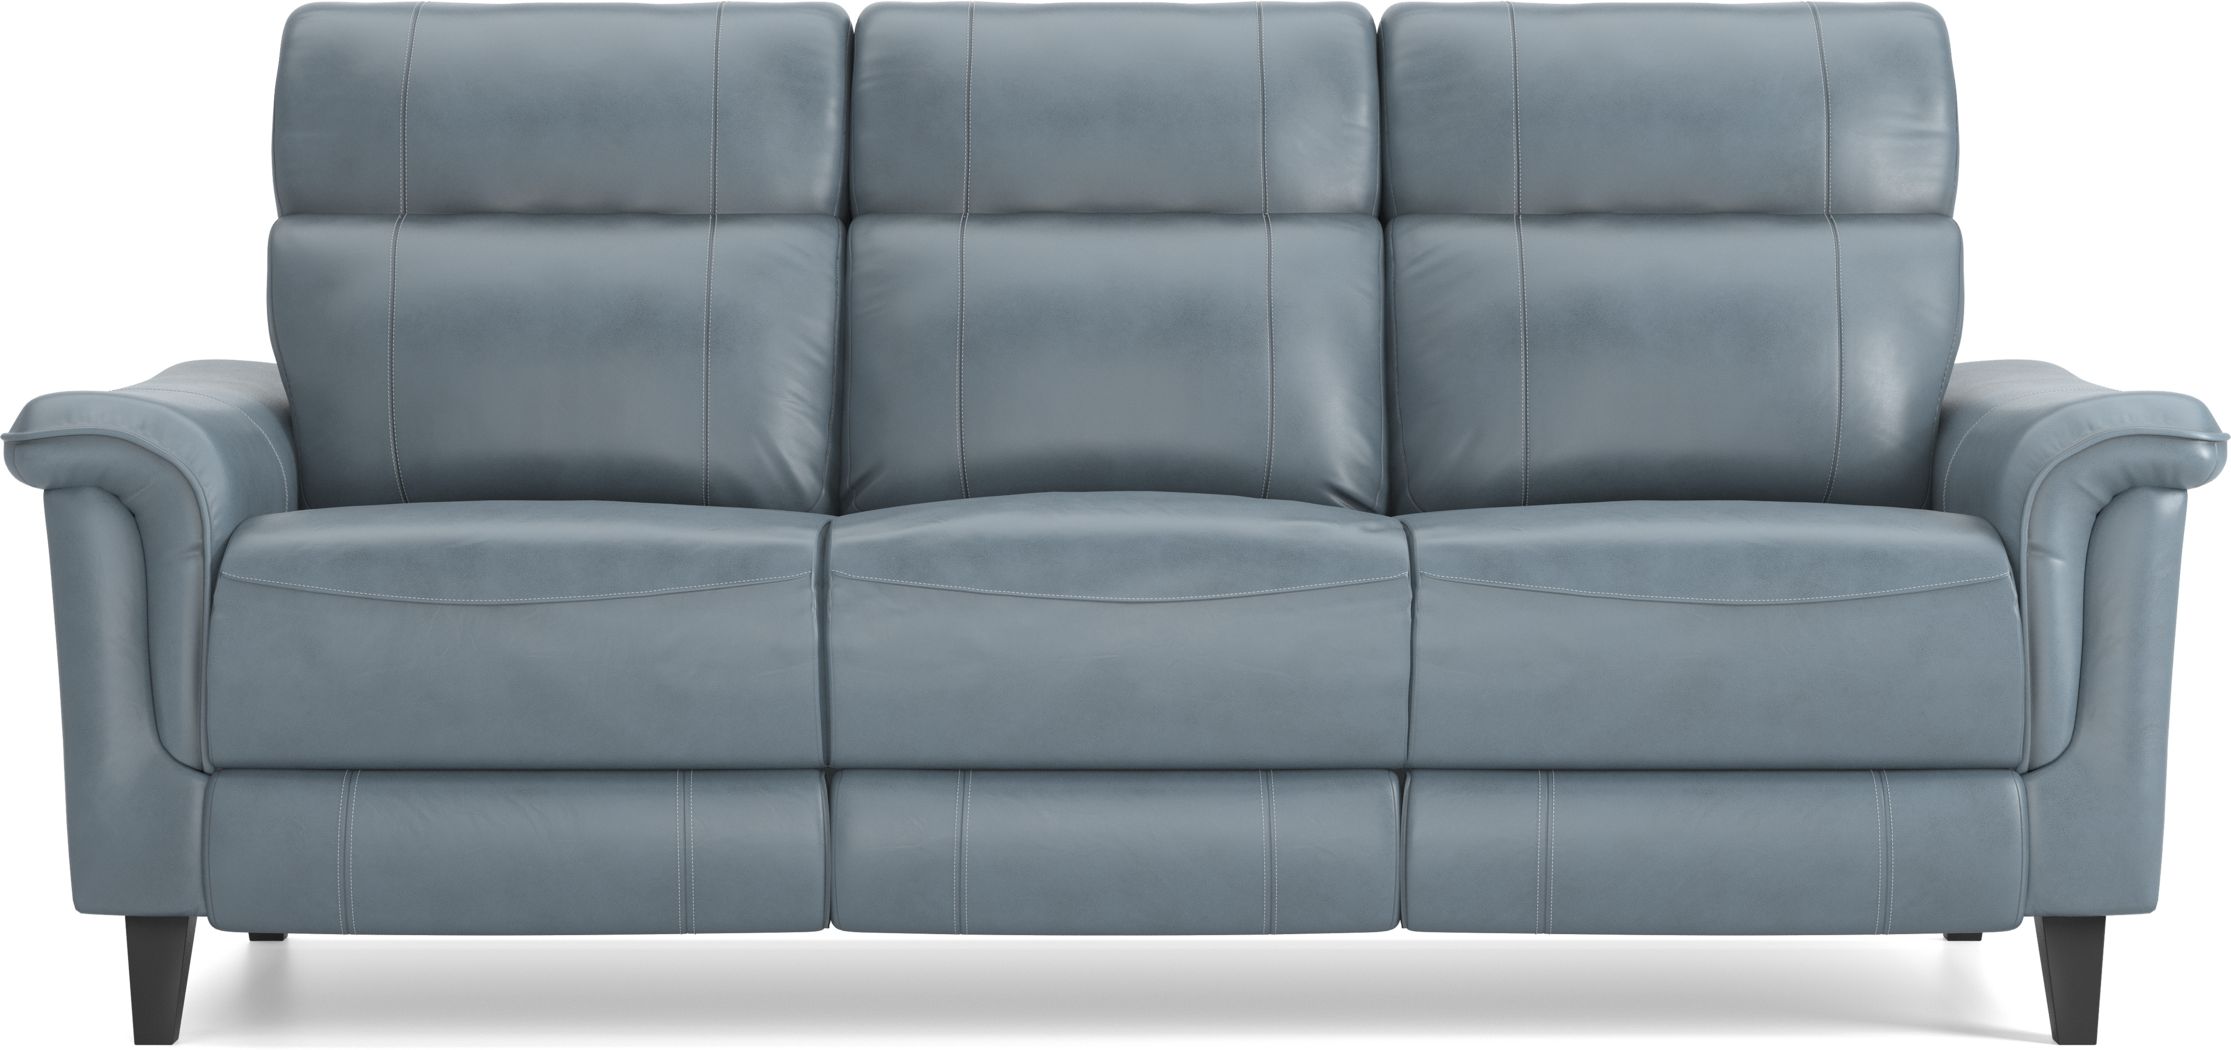 Recliner Sofas For, Double Reclining Leather Sofa